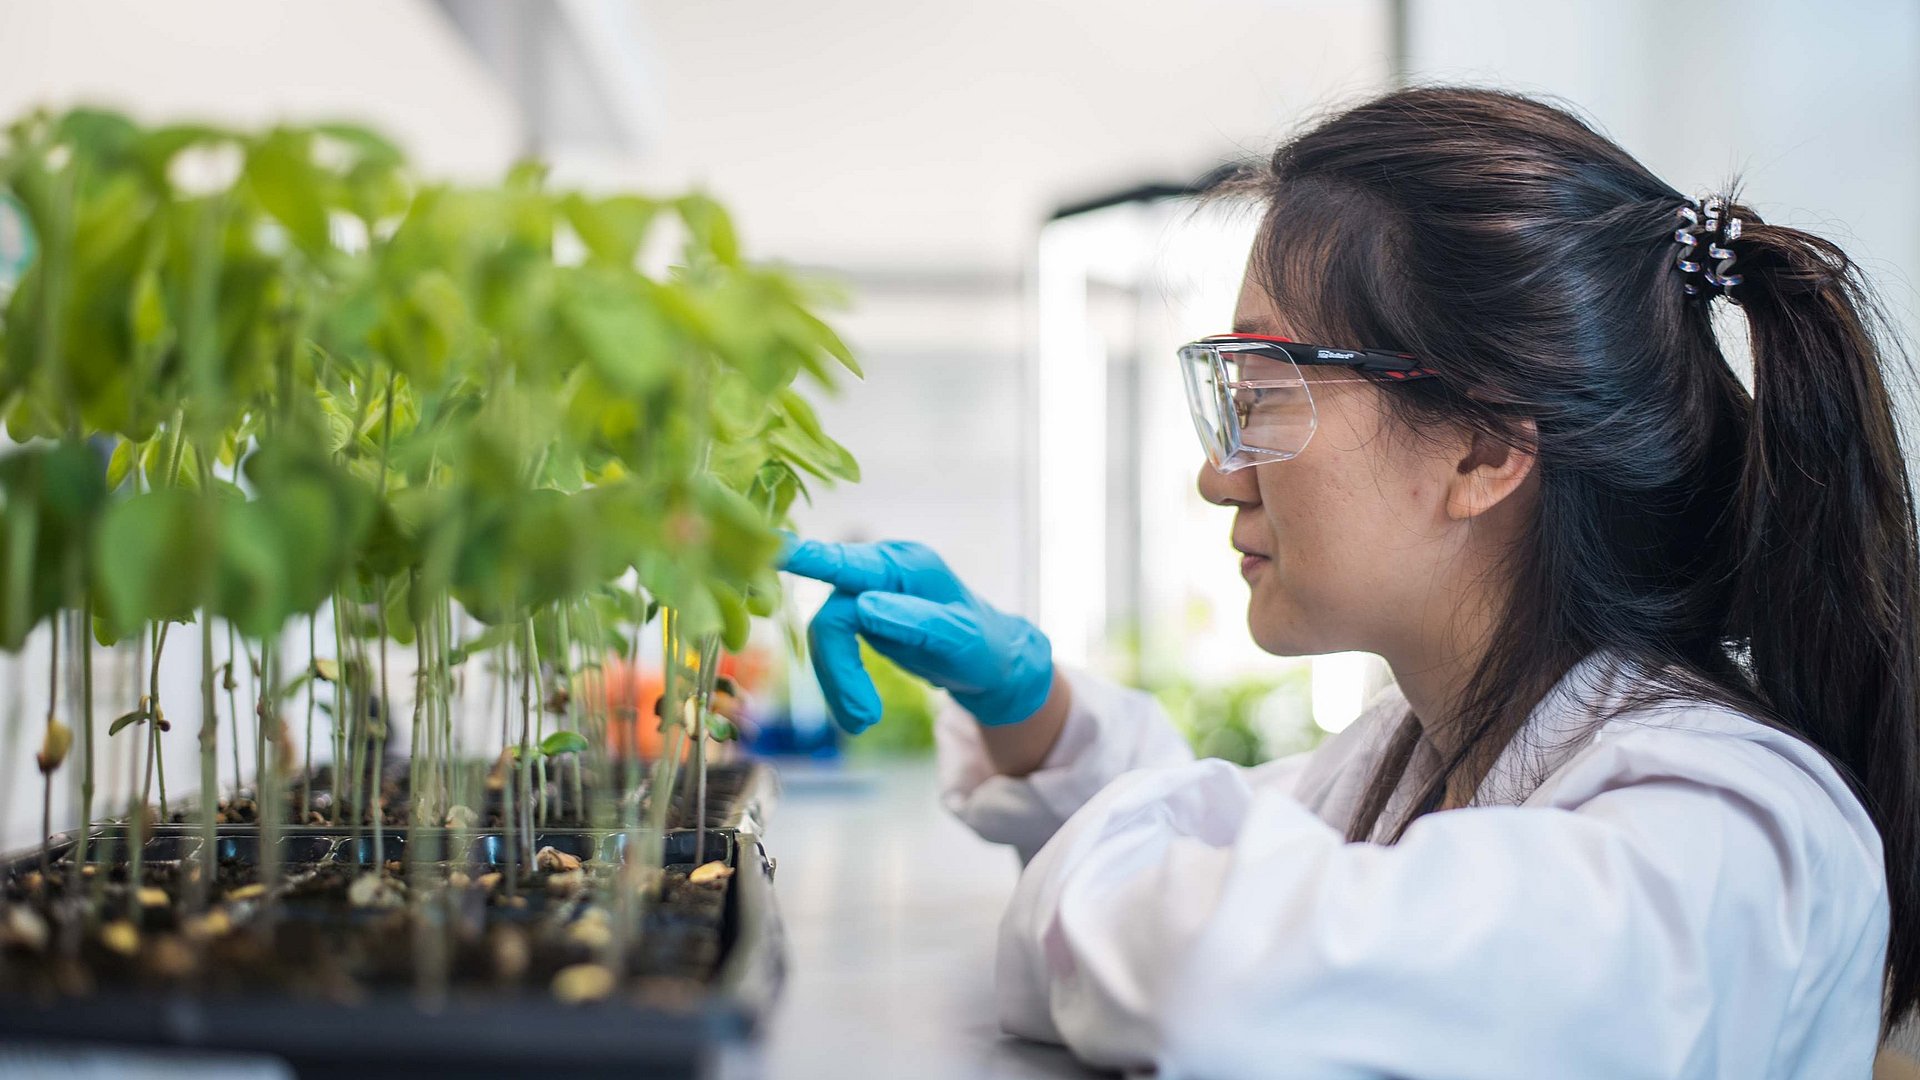 Researcher with soy plants